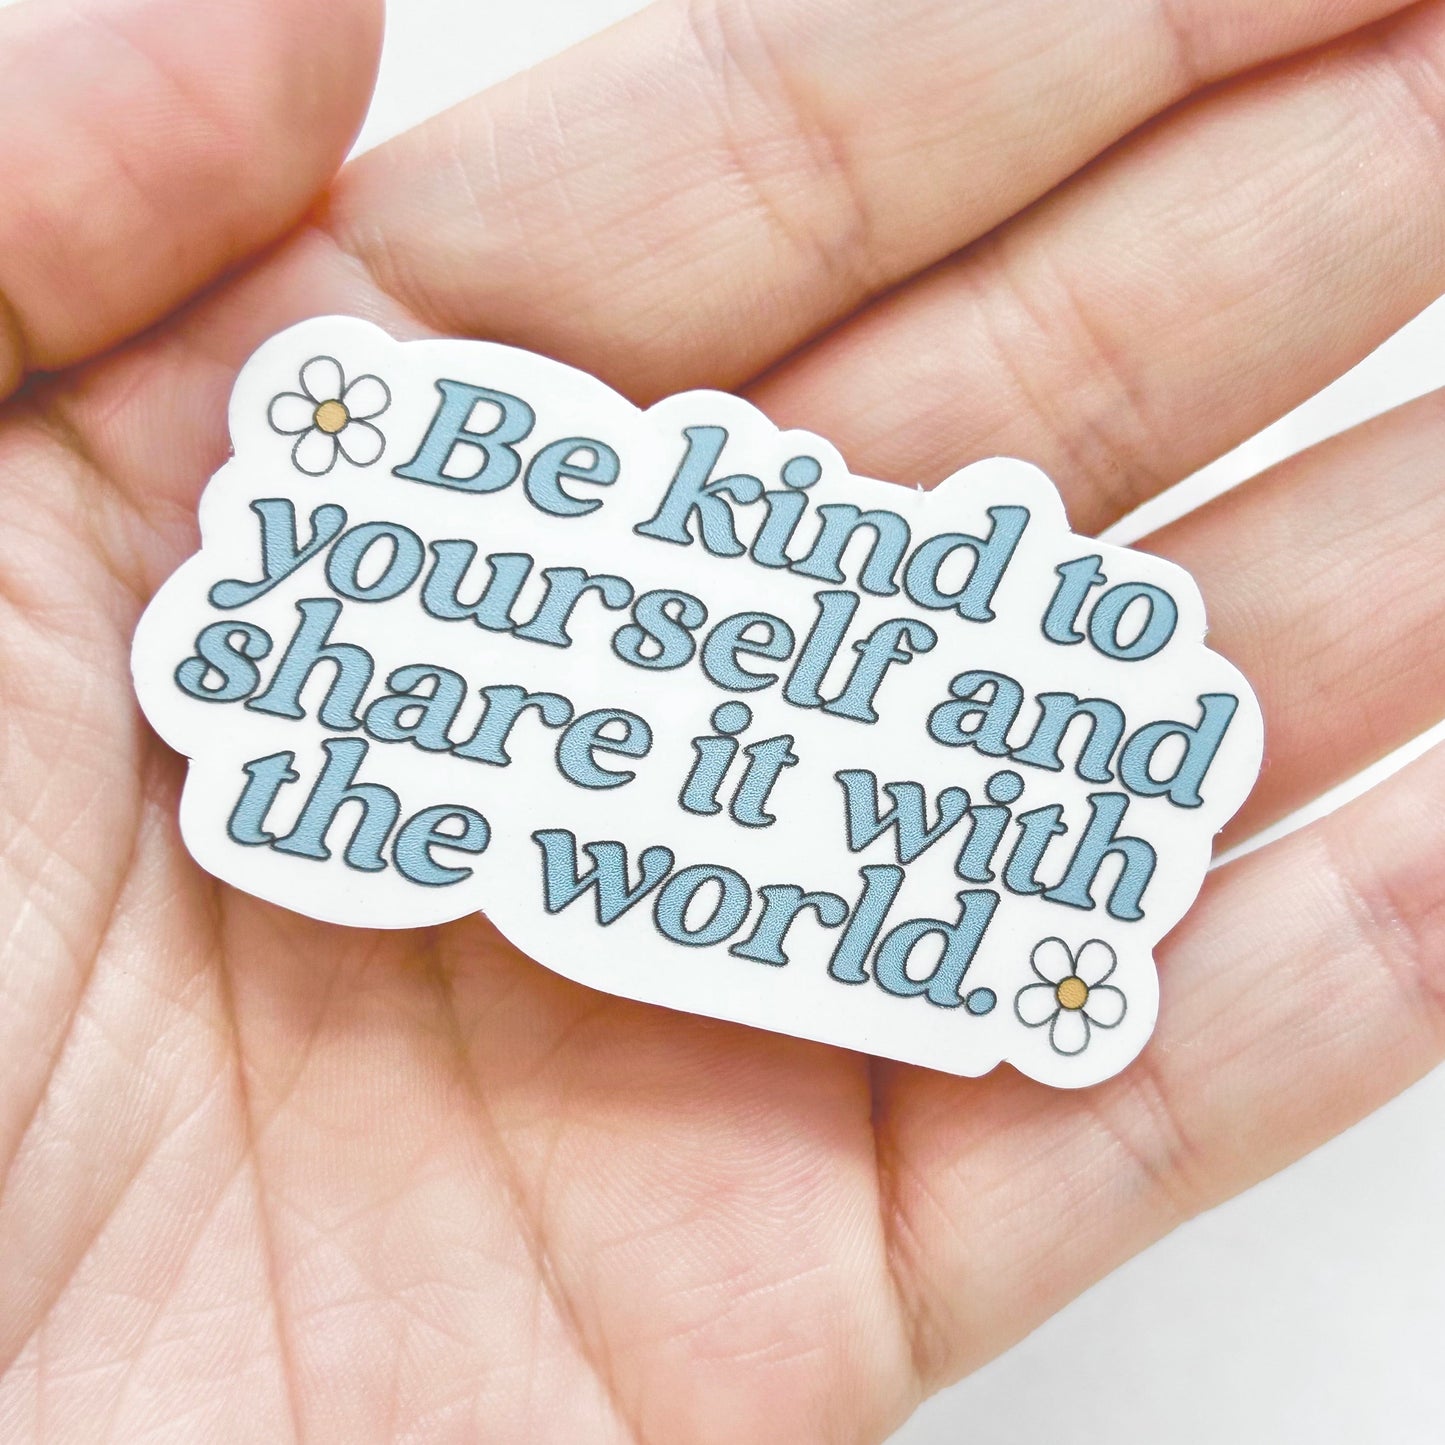 Be Kind to Yourself and Share it with The World Sticker